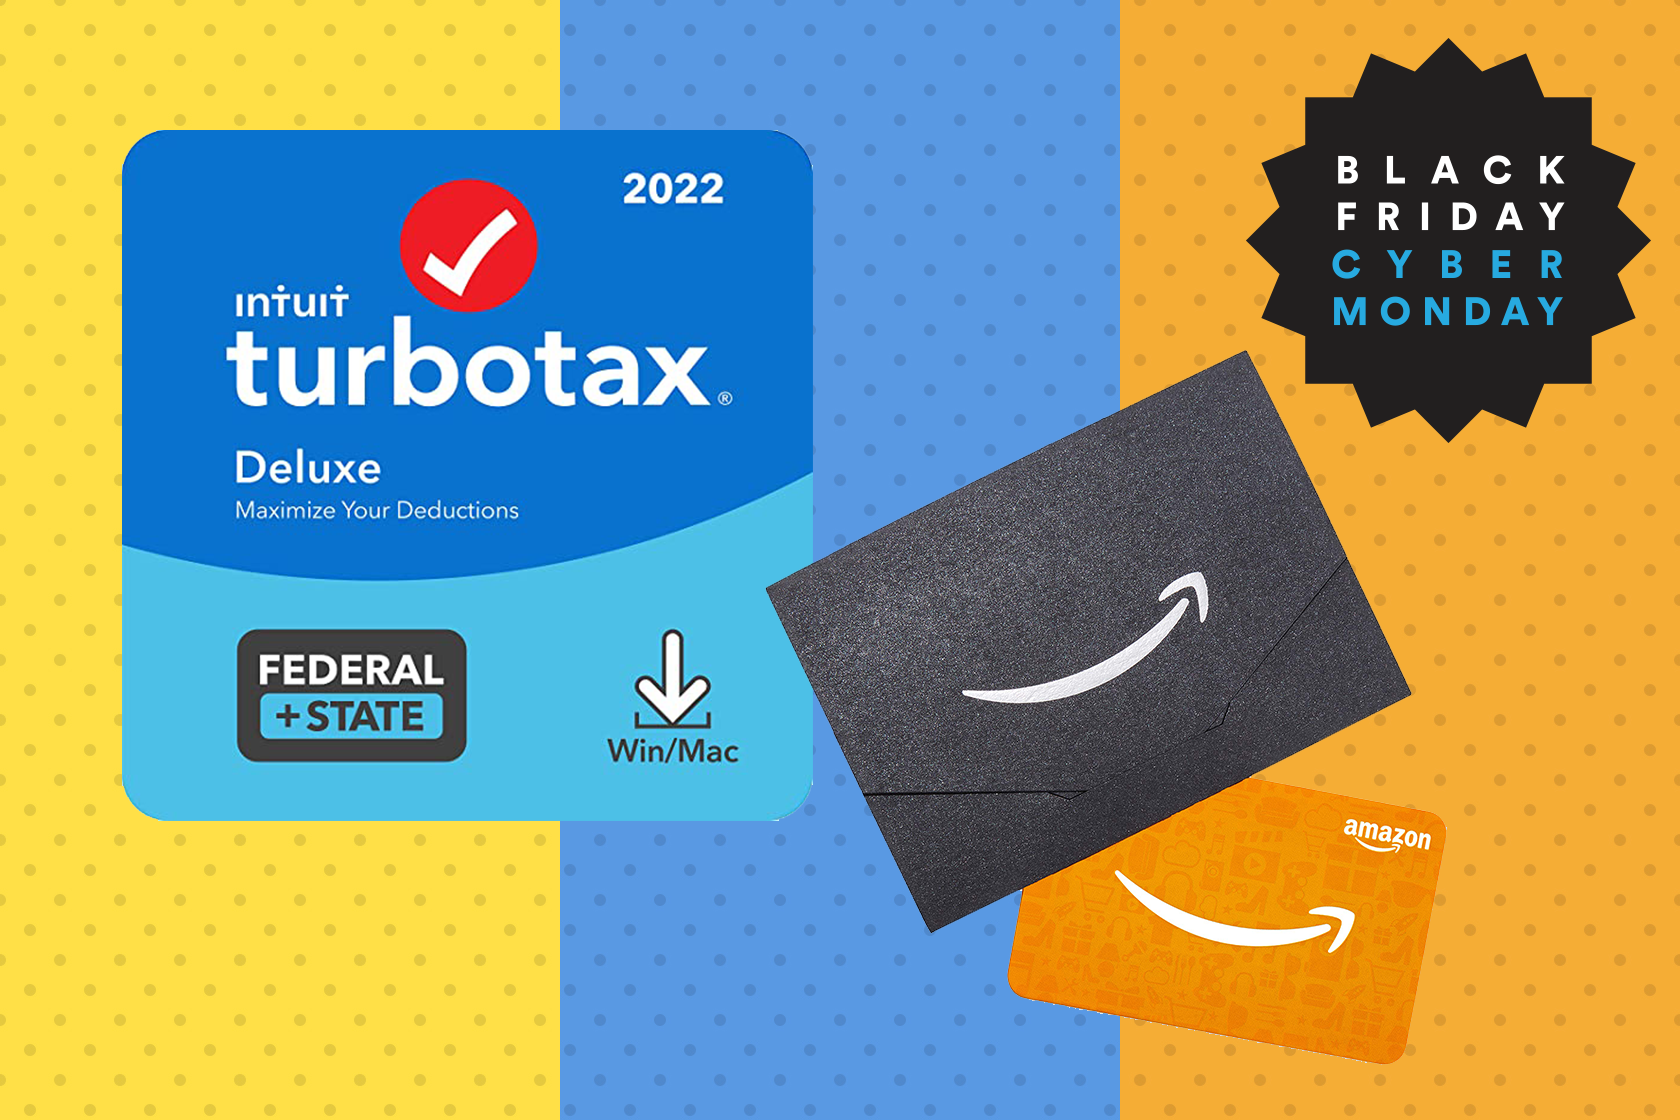 Don't Get Your Tax Refund on an Amazon Gift Card | Lifehacker